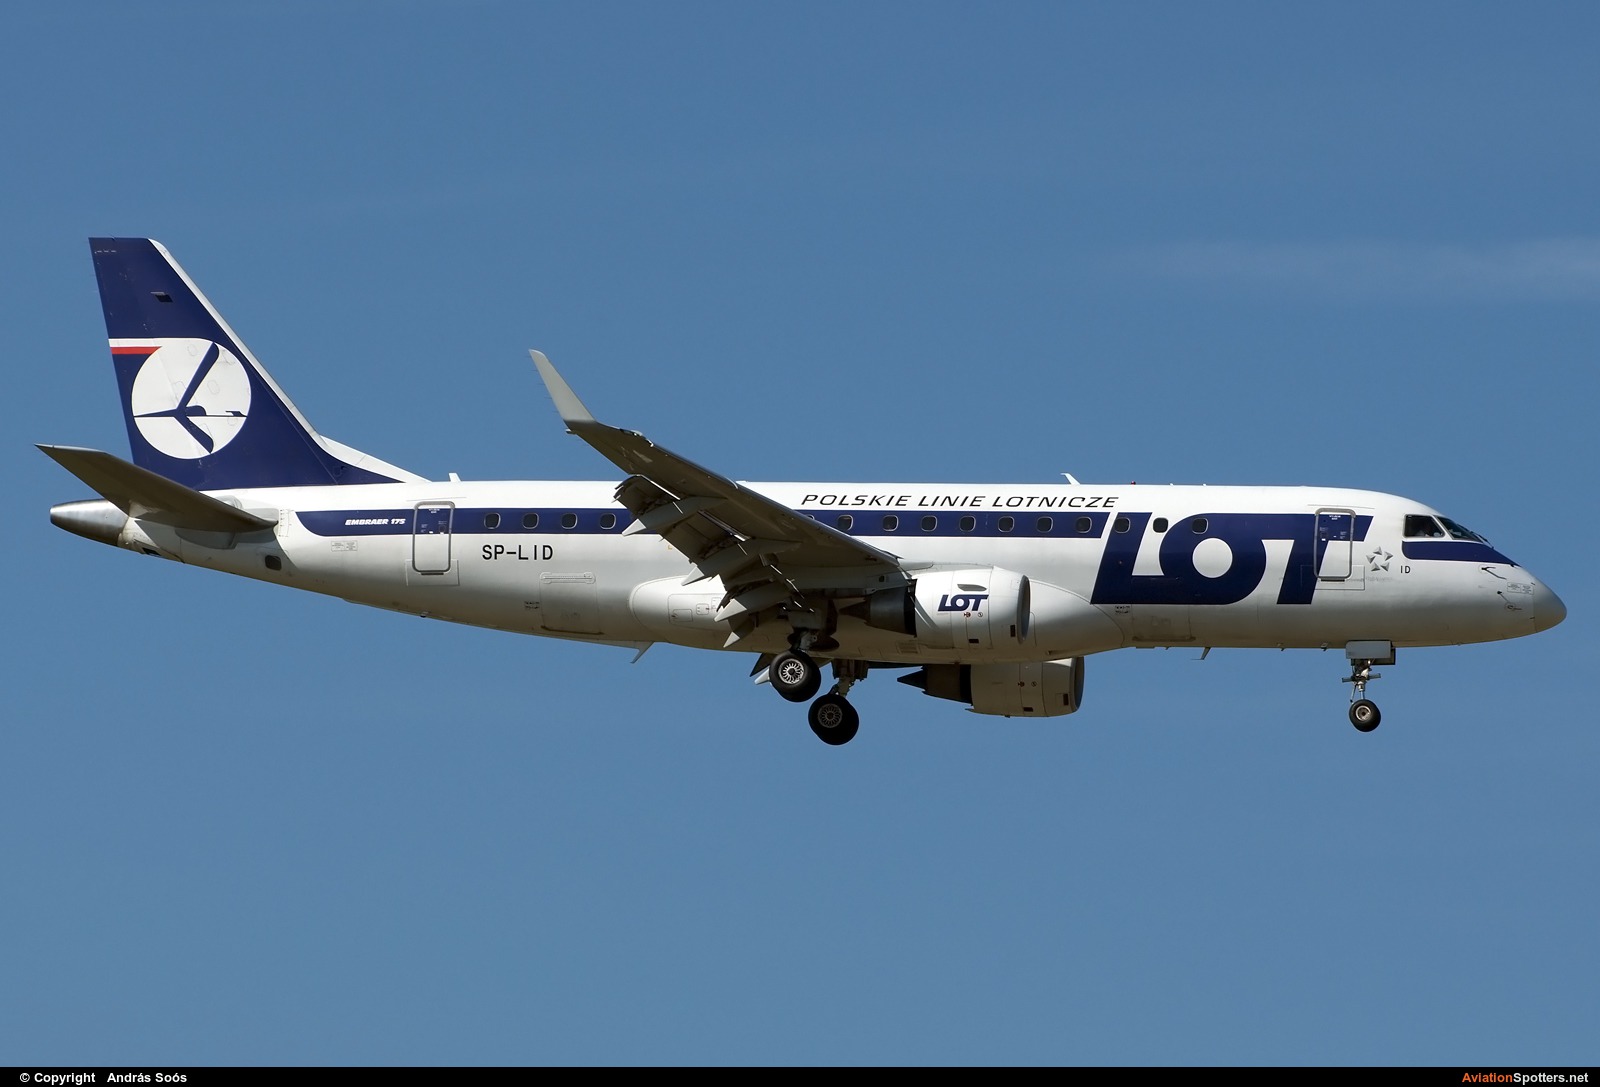 LOT - Polish Airlines  -  175  (SP-LID) By András Soós (sas1965)